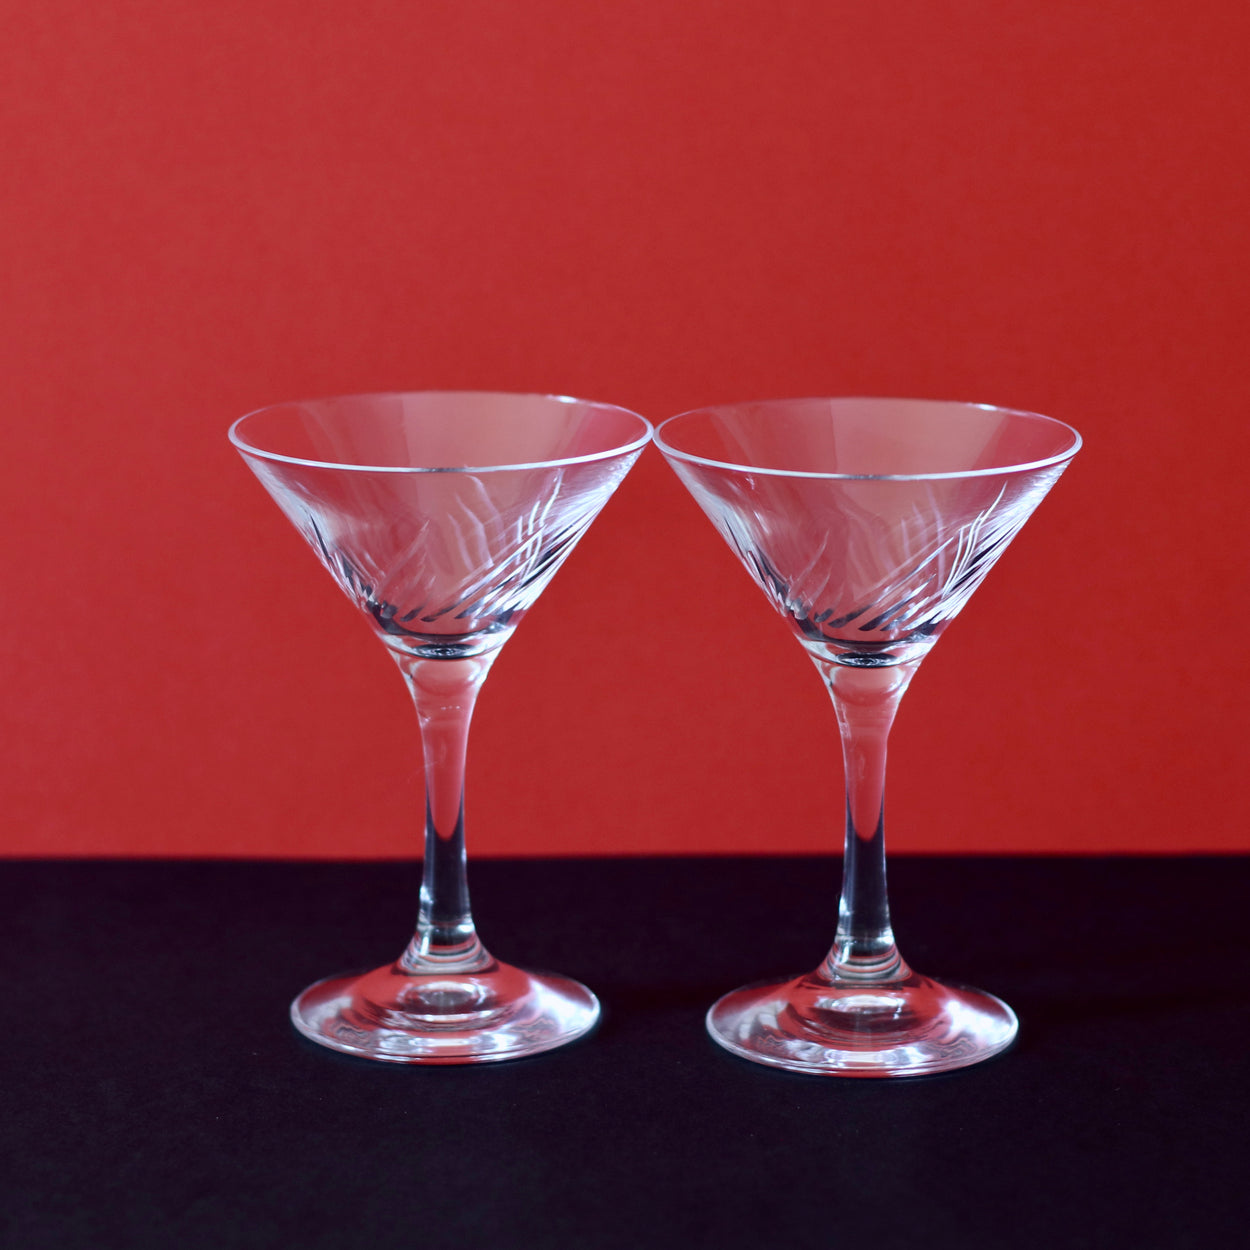 Japanese martini glasses x 2, against red and black backdrop